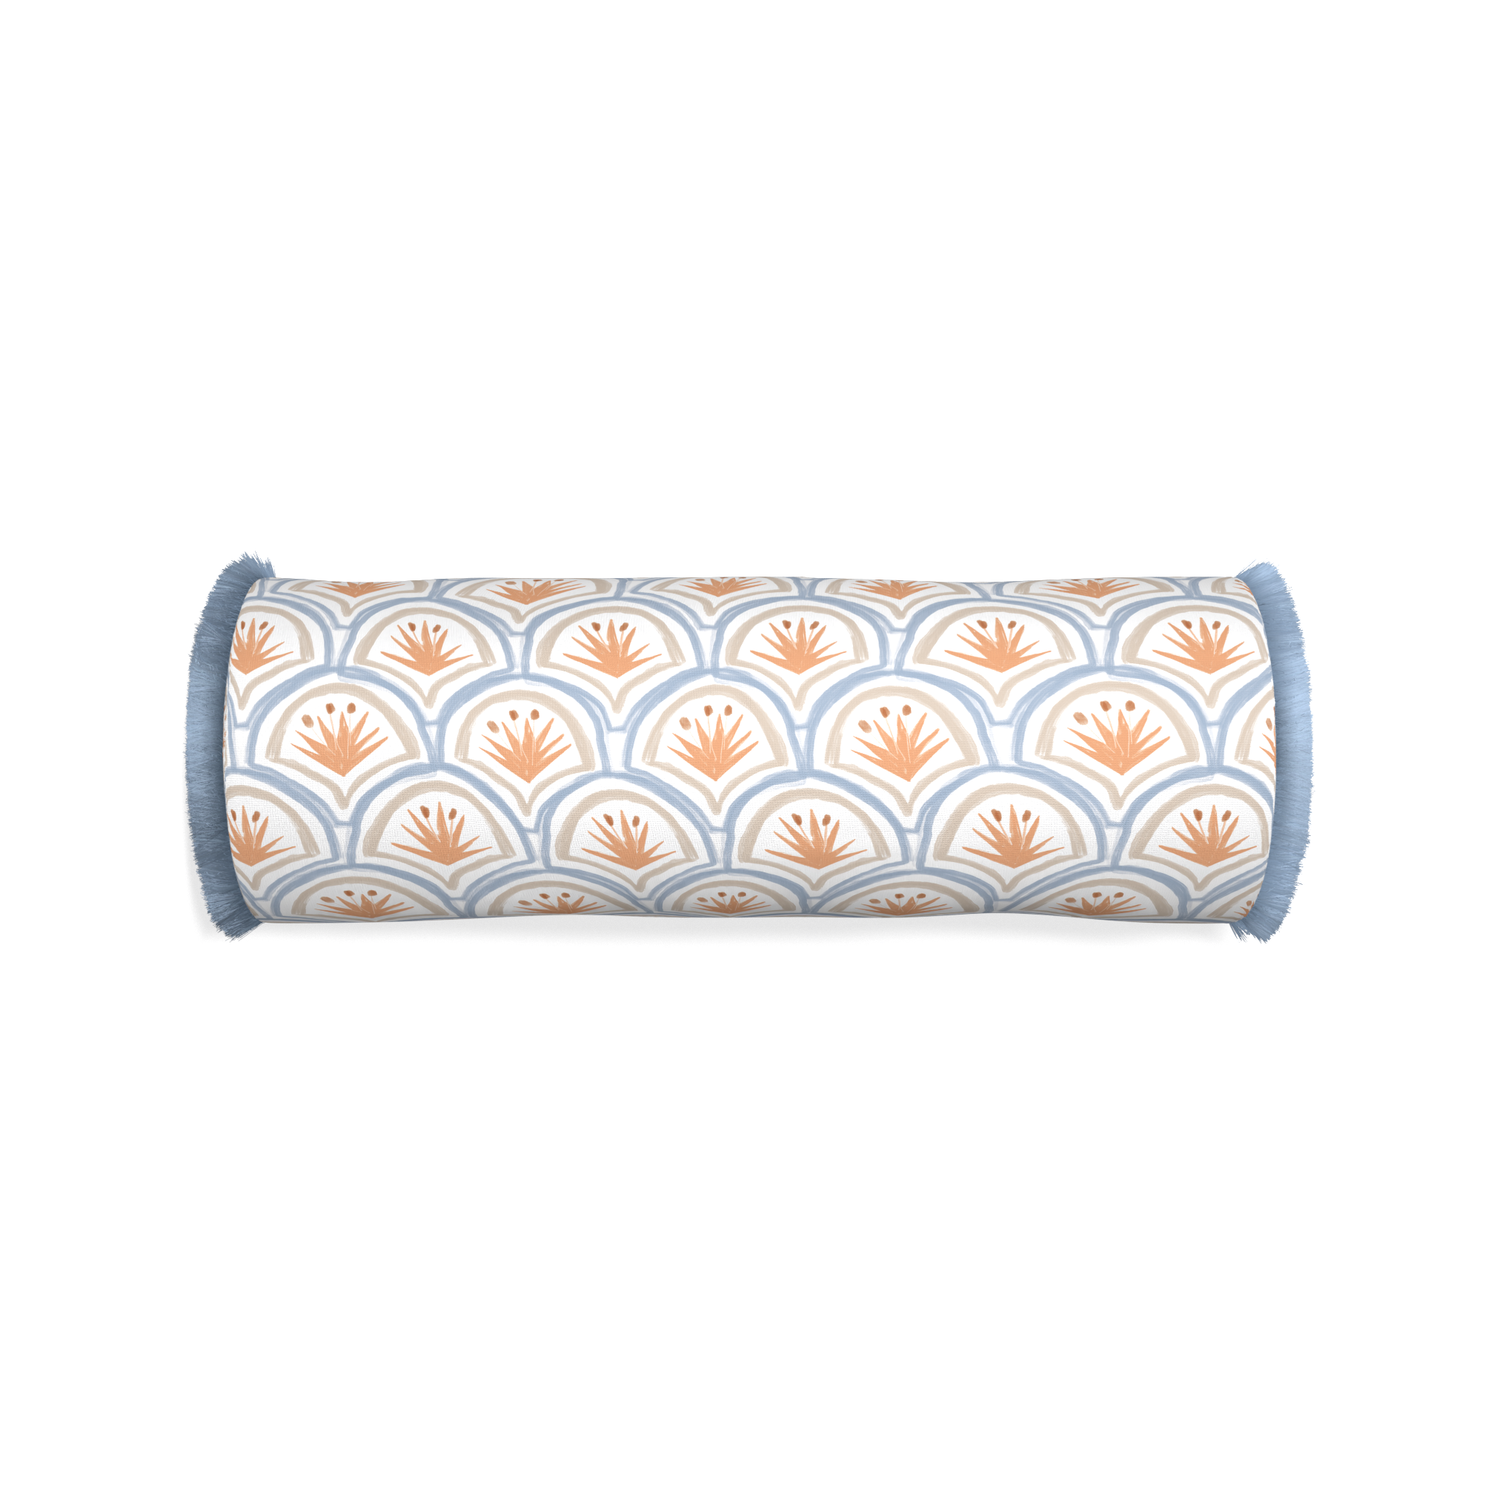 Bolster thatcher apricot custom art deco palm patternpillow with sky fringe on white background